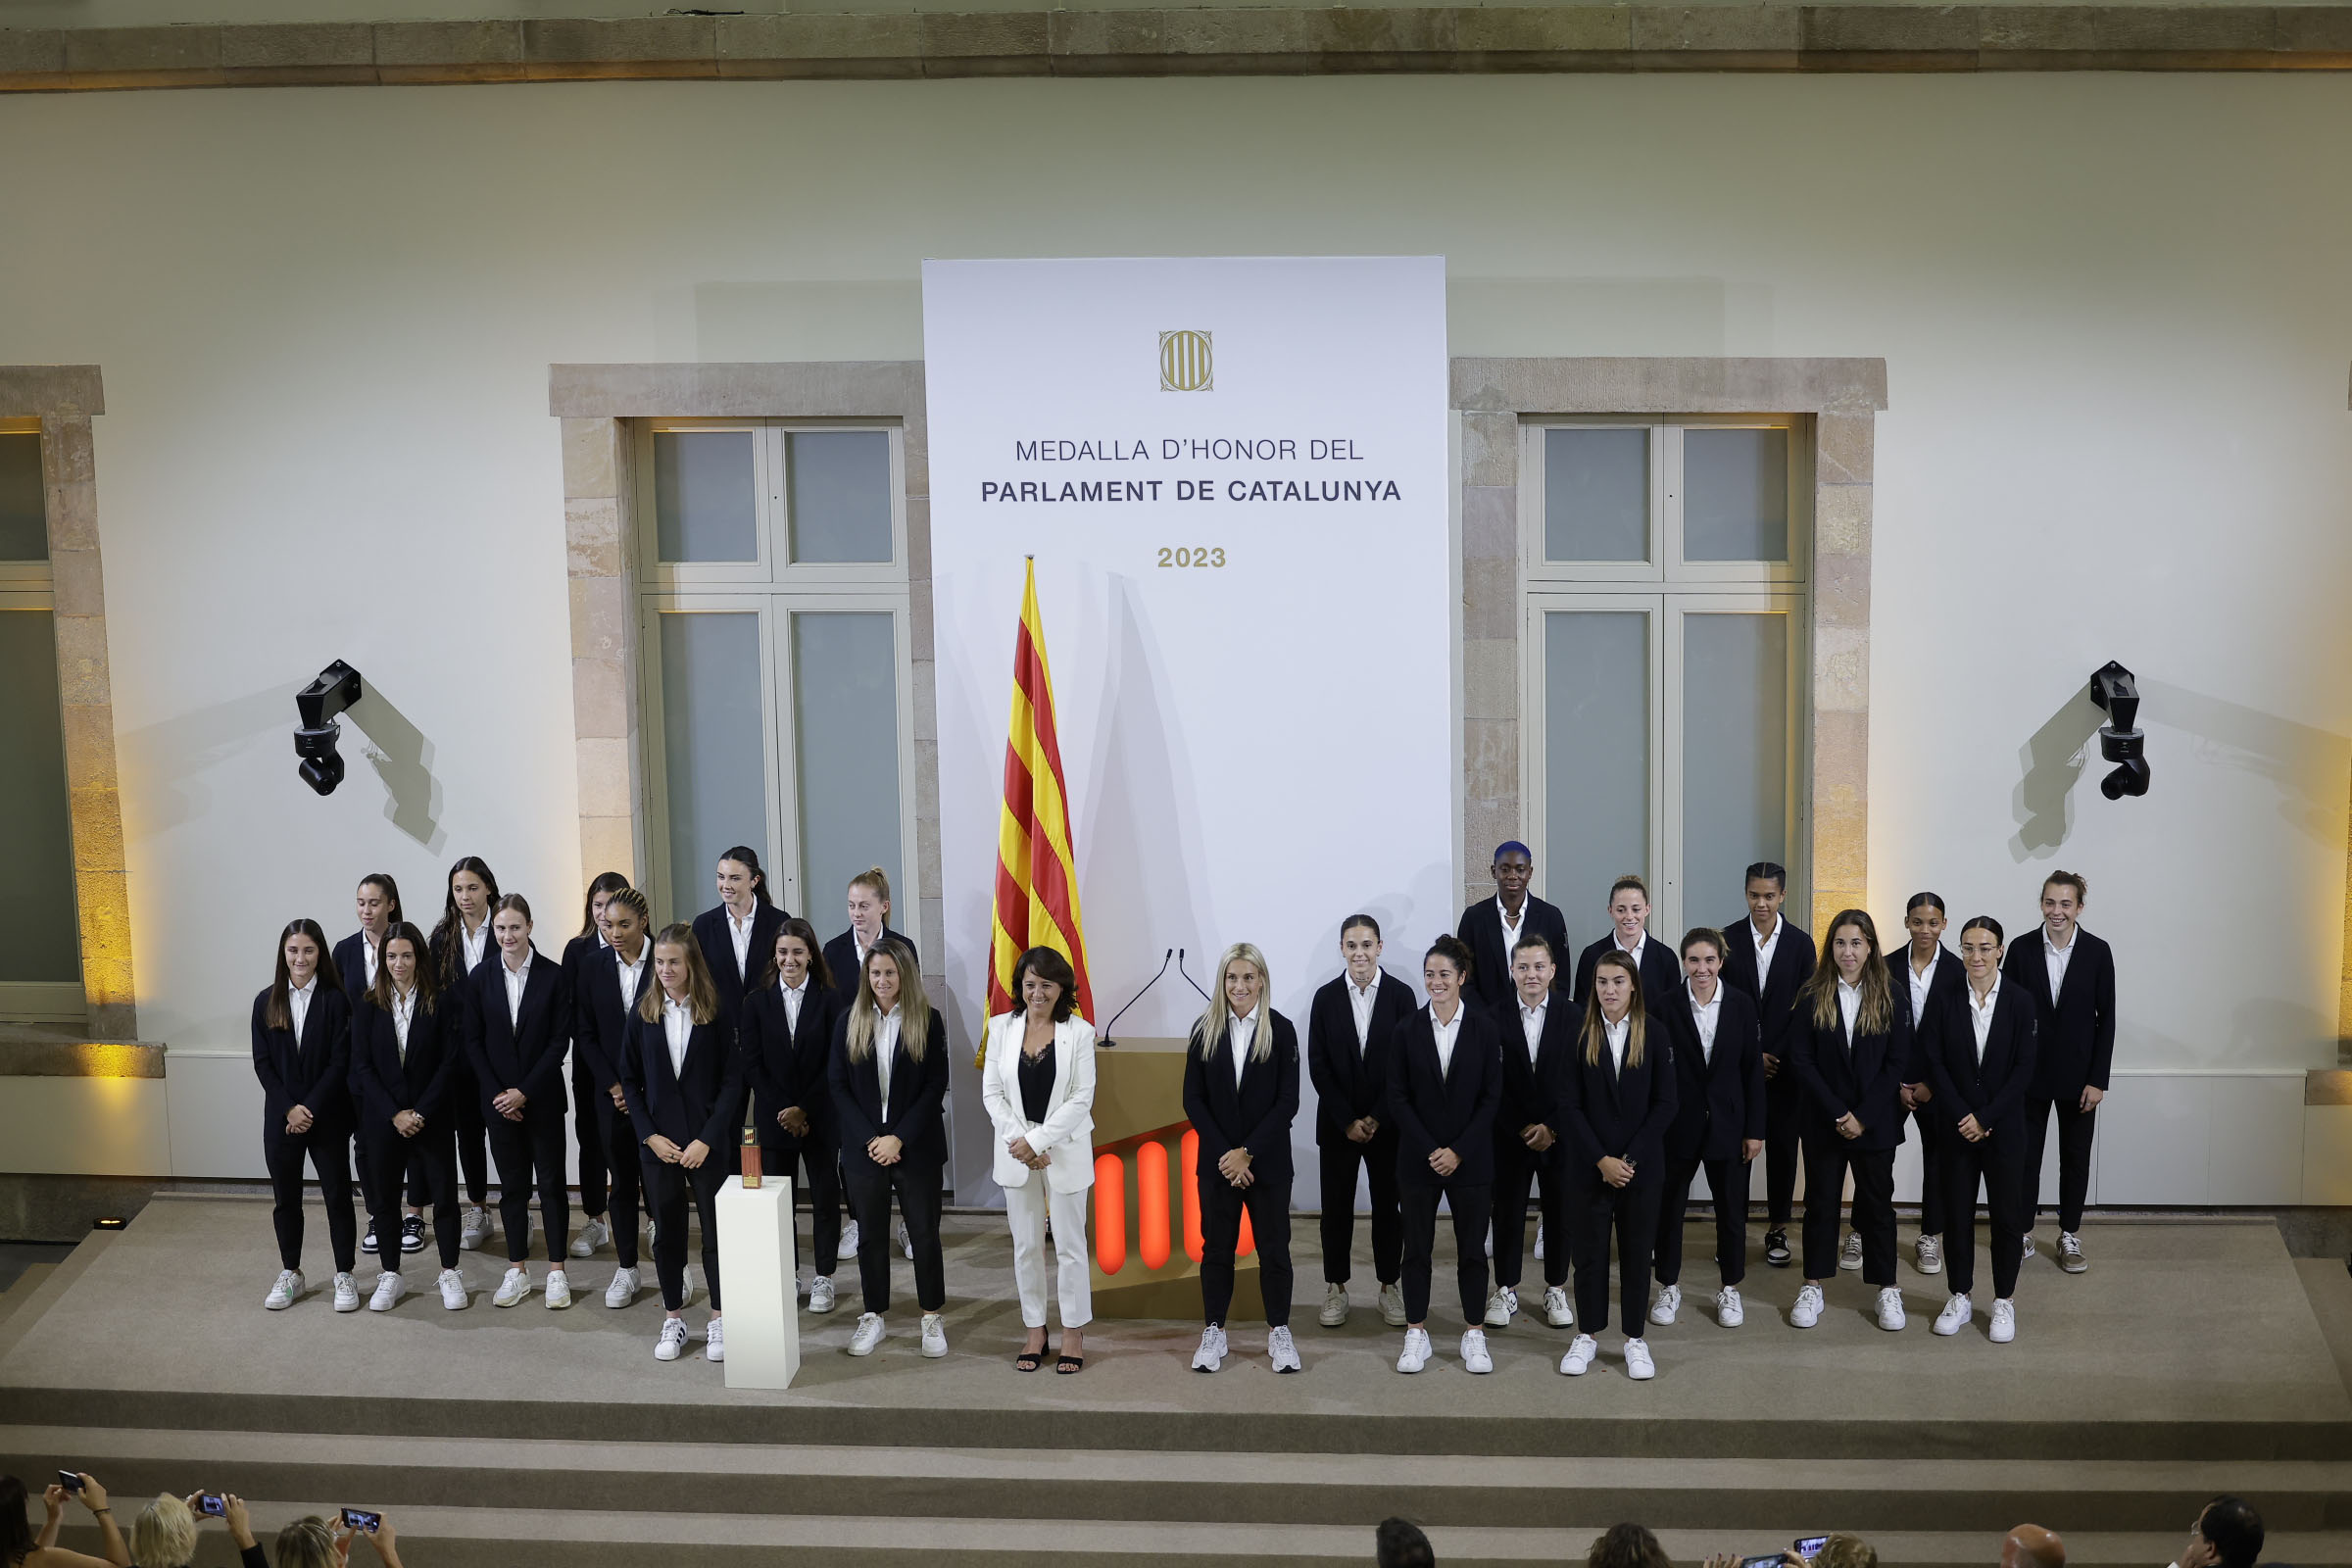 FC Barcelona femení during the Catalan parliament Gold Medal of Honor award ceremony with the Catalan parliament speaker, Anna Erra, on September 13, 2023